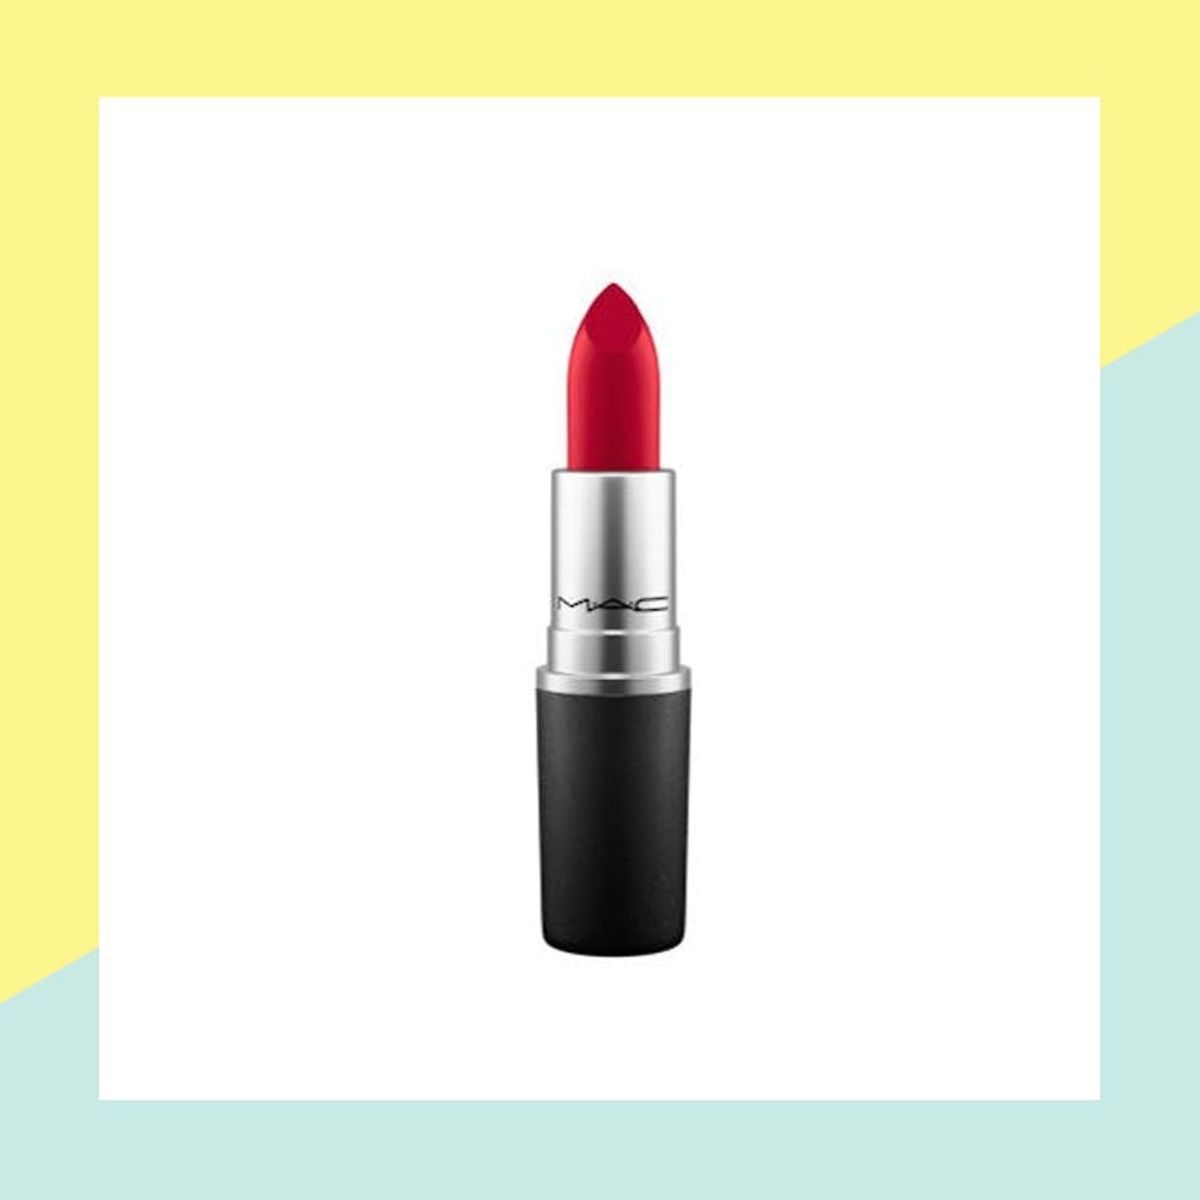 How to Score a Free MAC Lipstick Without Having to Spend a Penny